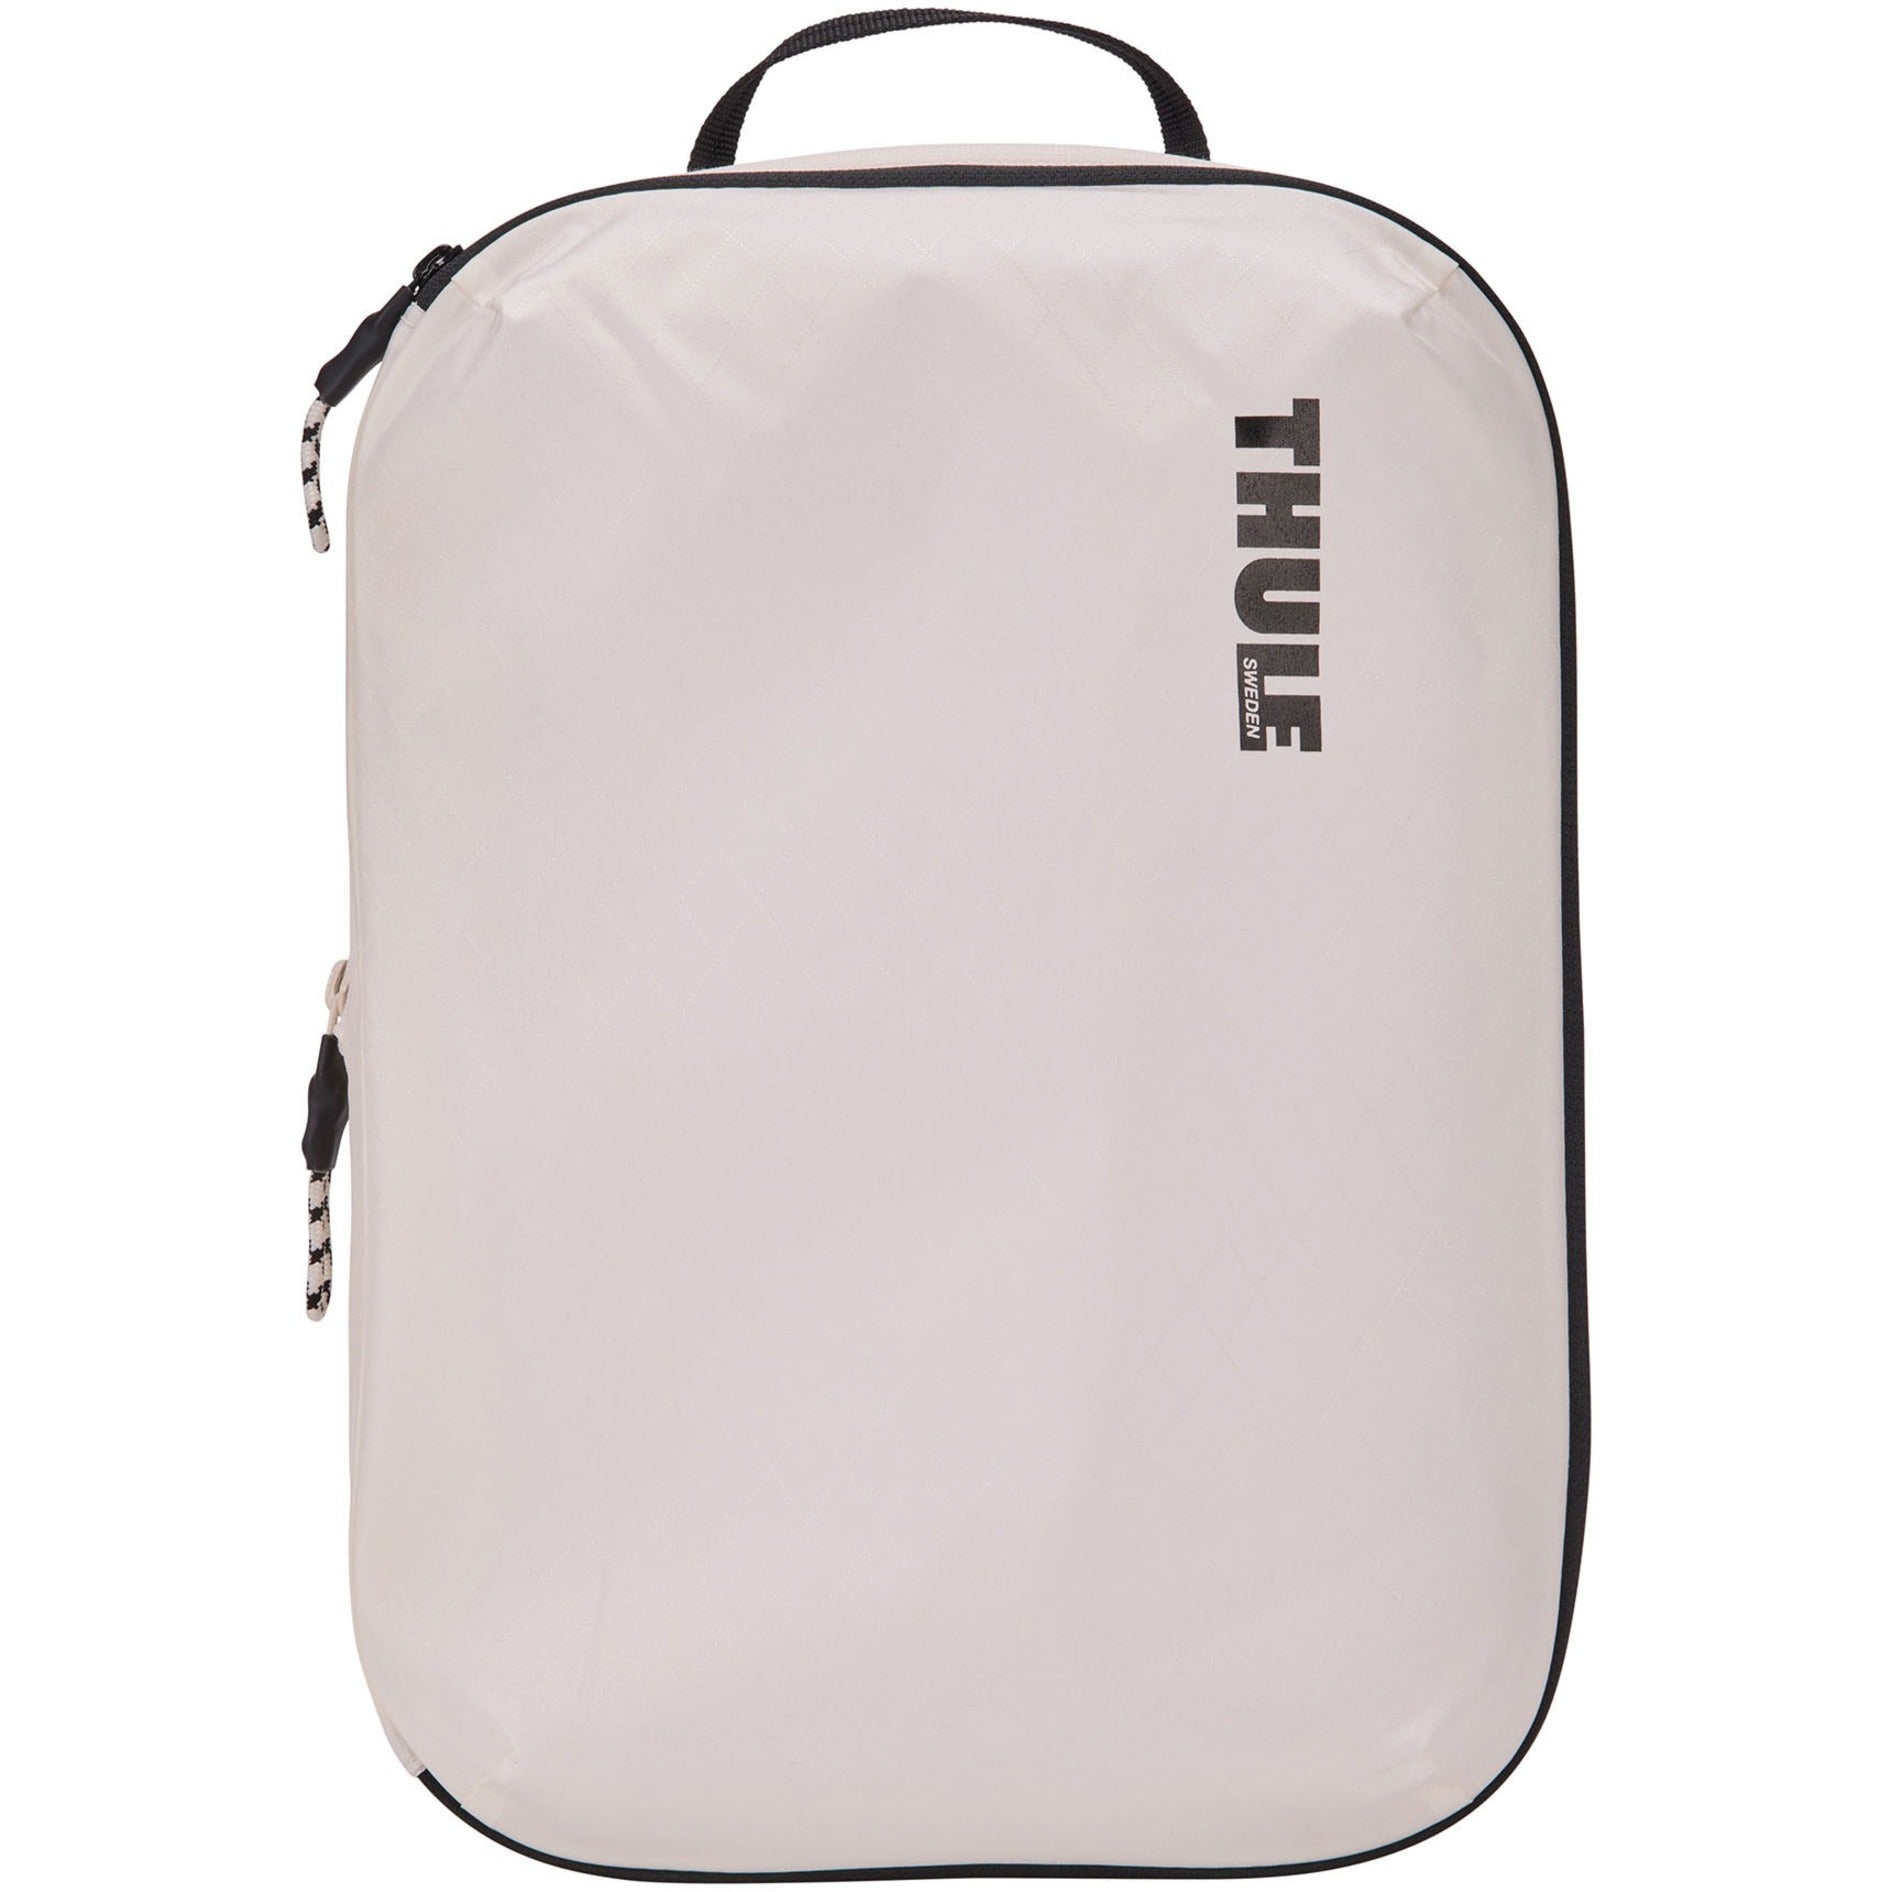 Thule (3204859) Carrying Case